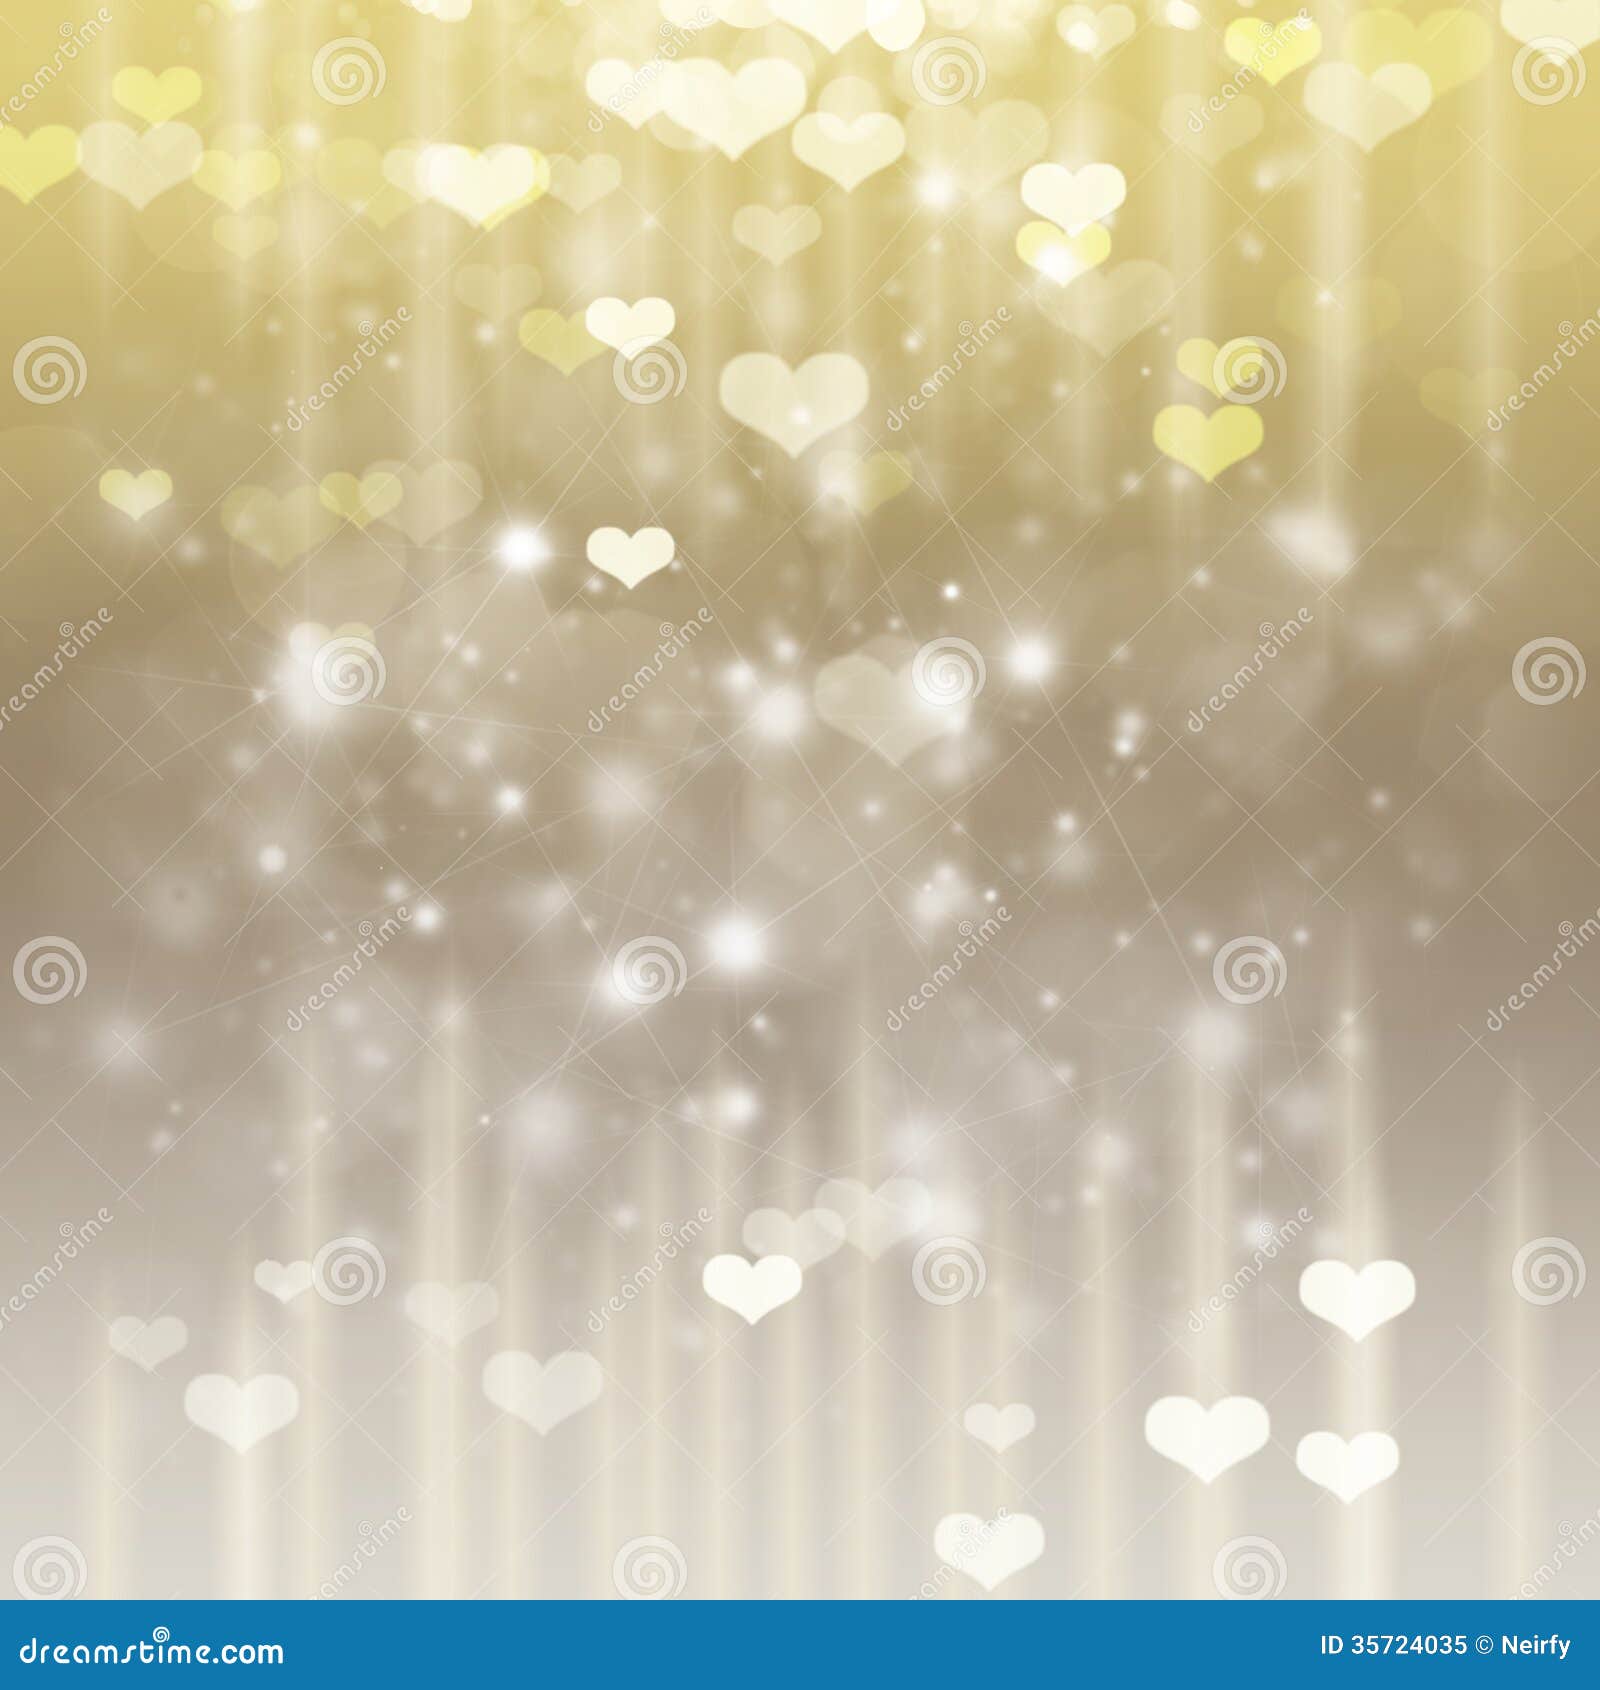 Valentines Day Siver Anf Gold Background Royalty Free Stock Photo - Image: 35724035